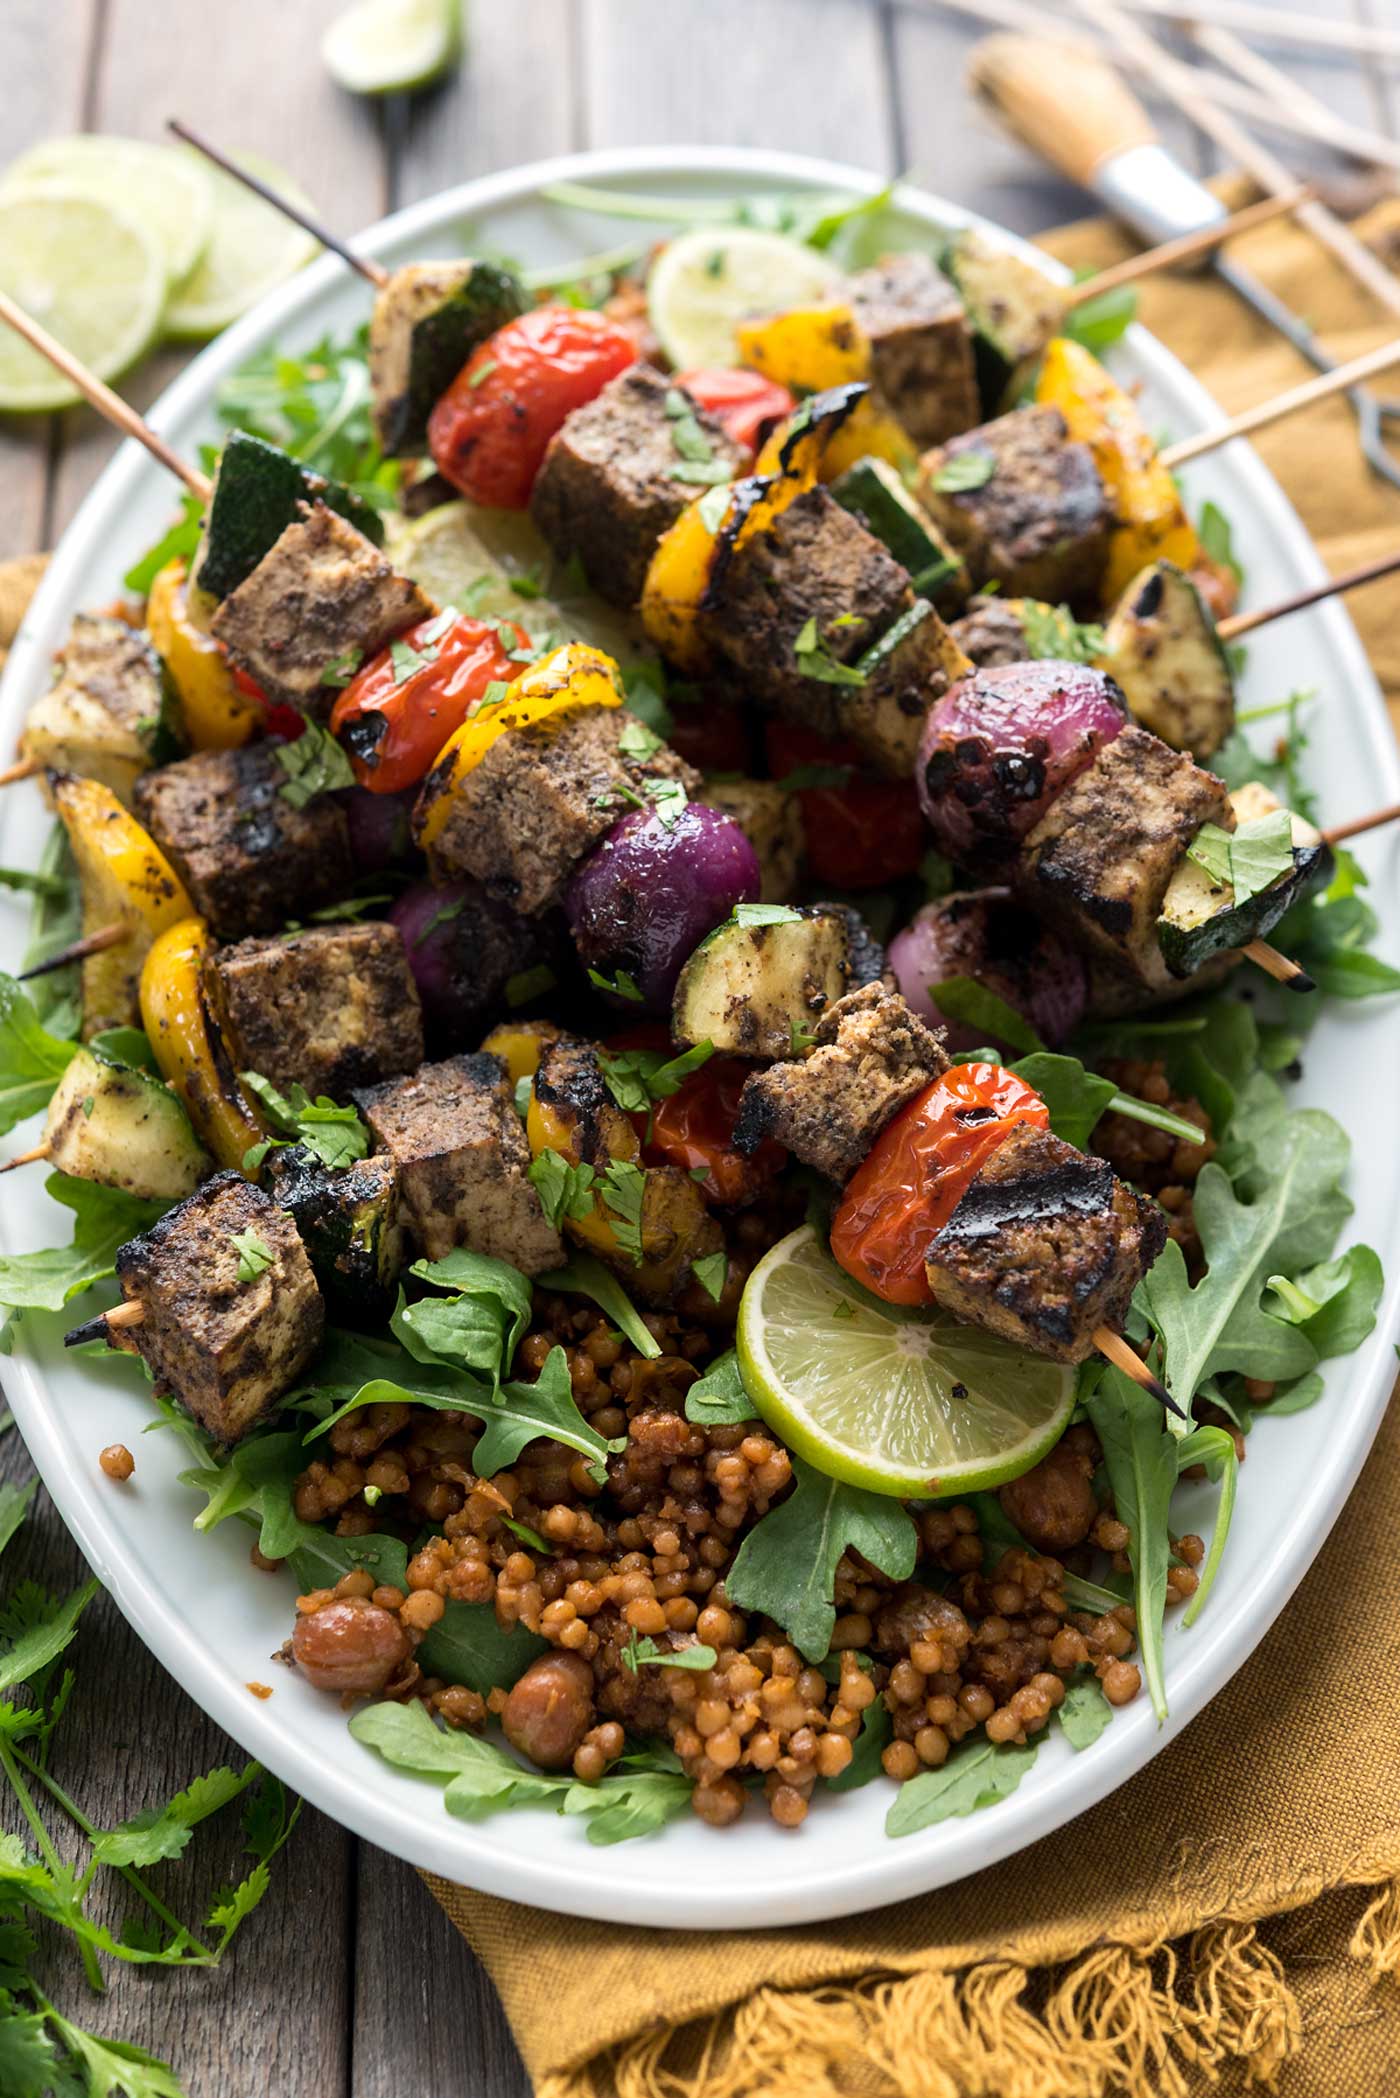 Grilled Tofu Shawarma Skewers! Perfect for Summer grilling, and made easily with Wild Garden’s marinade. #vegan #veganyackattack #wildgardeneats